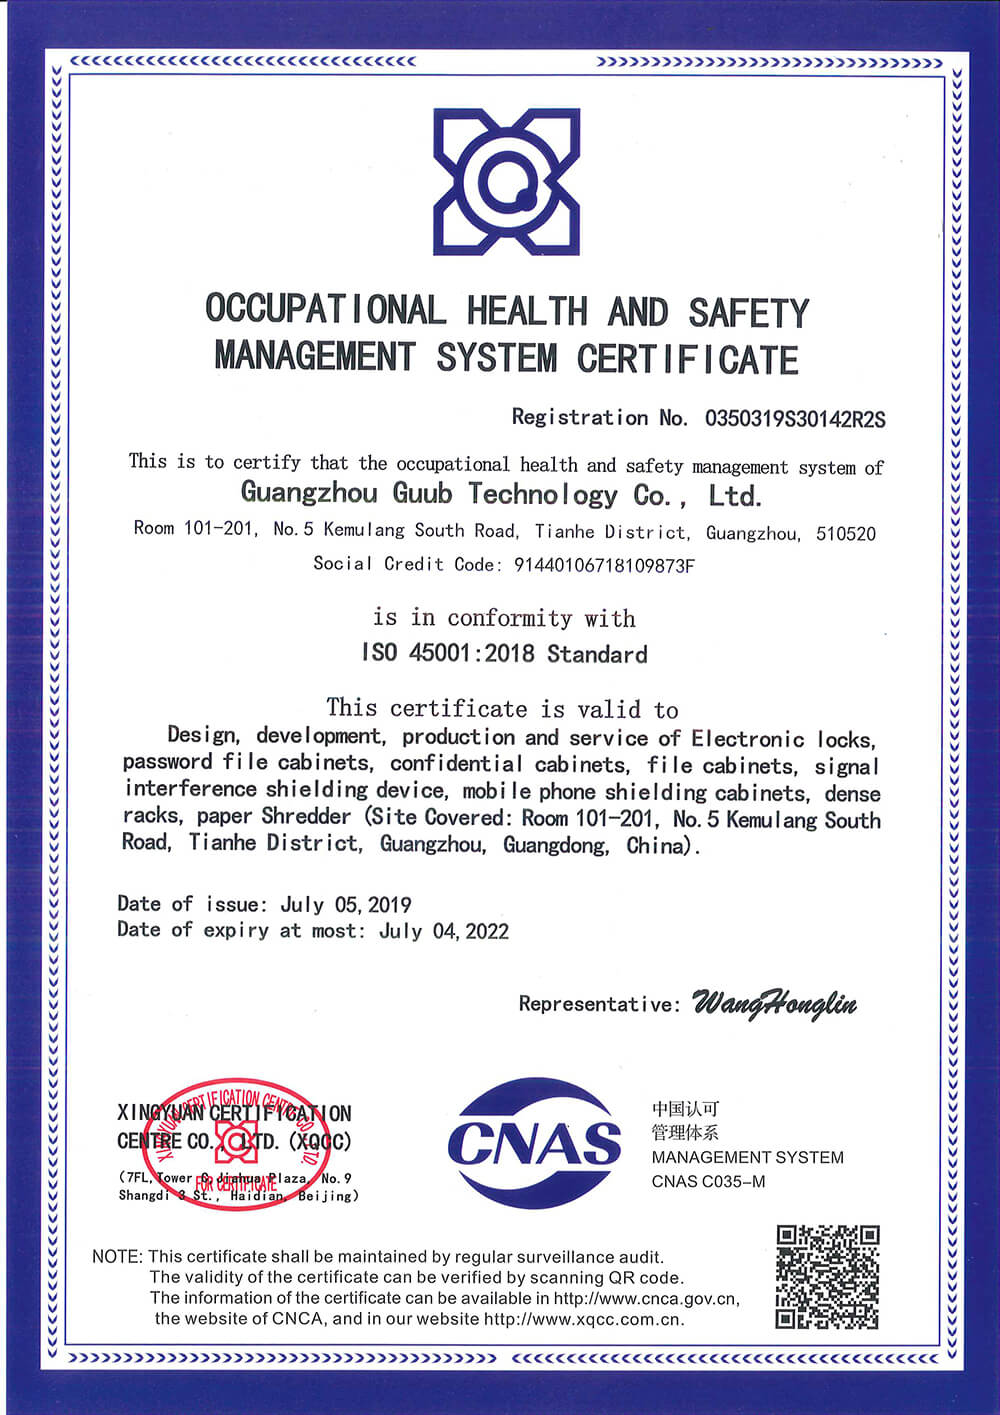 Guub-Occupational Health and safety management certificate